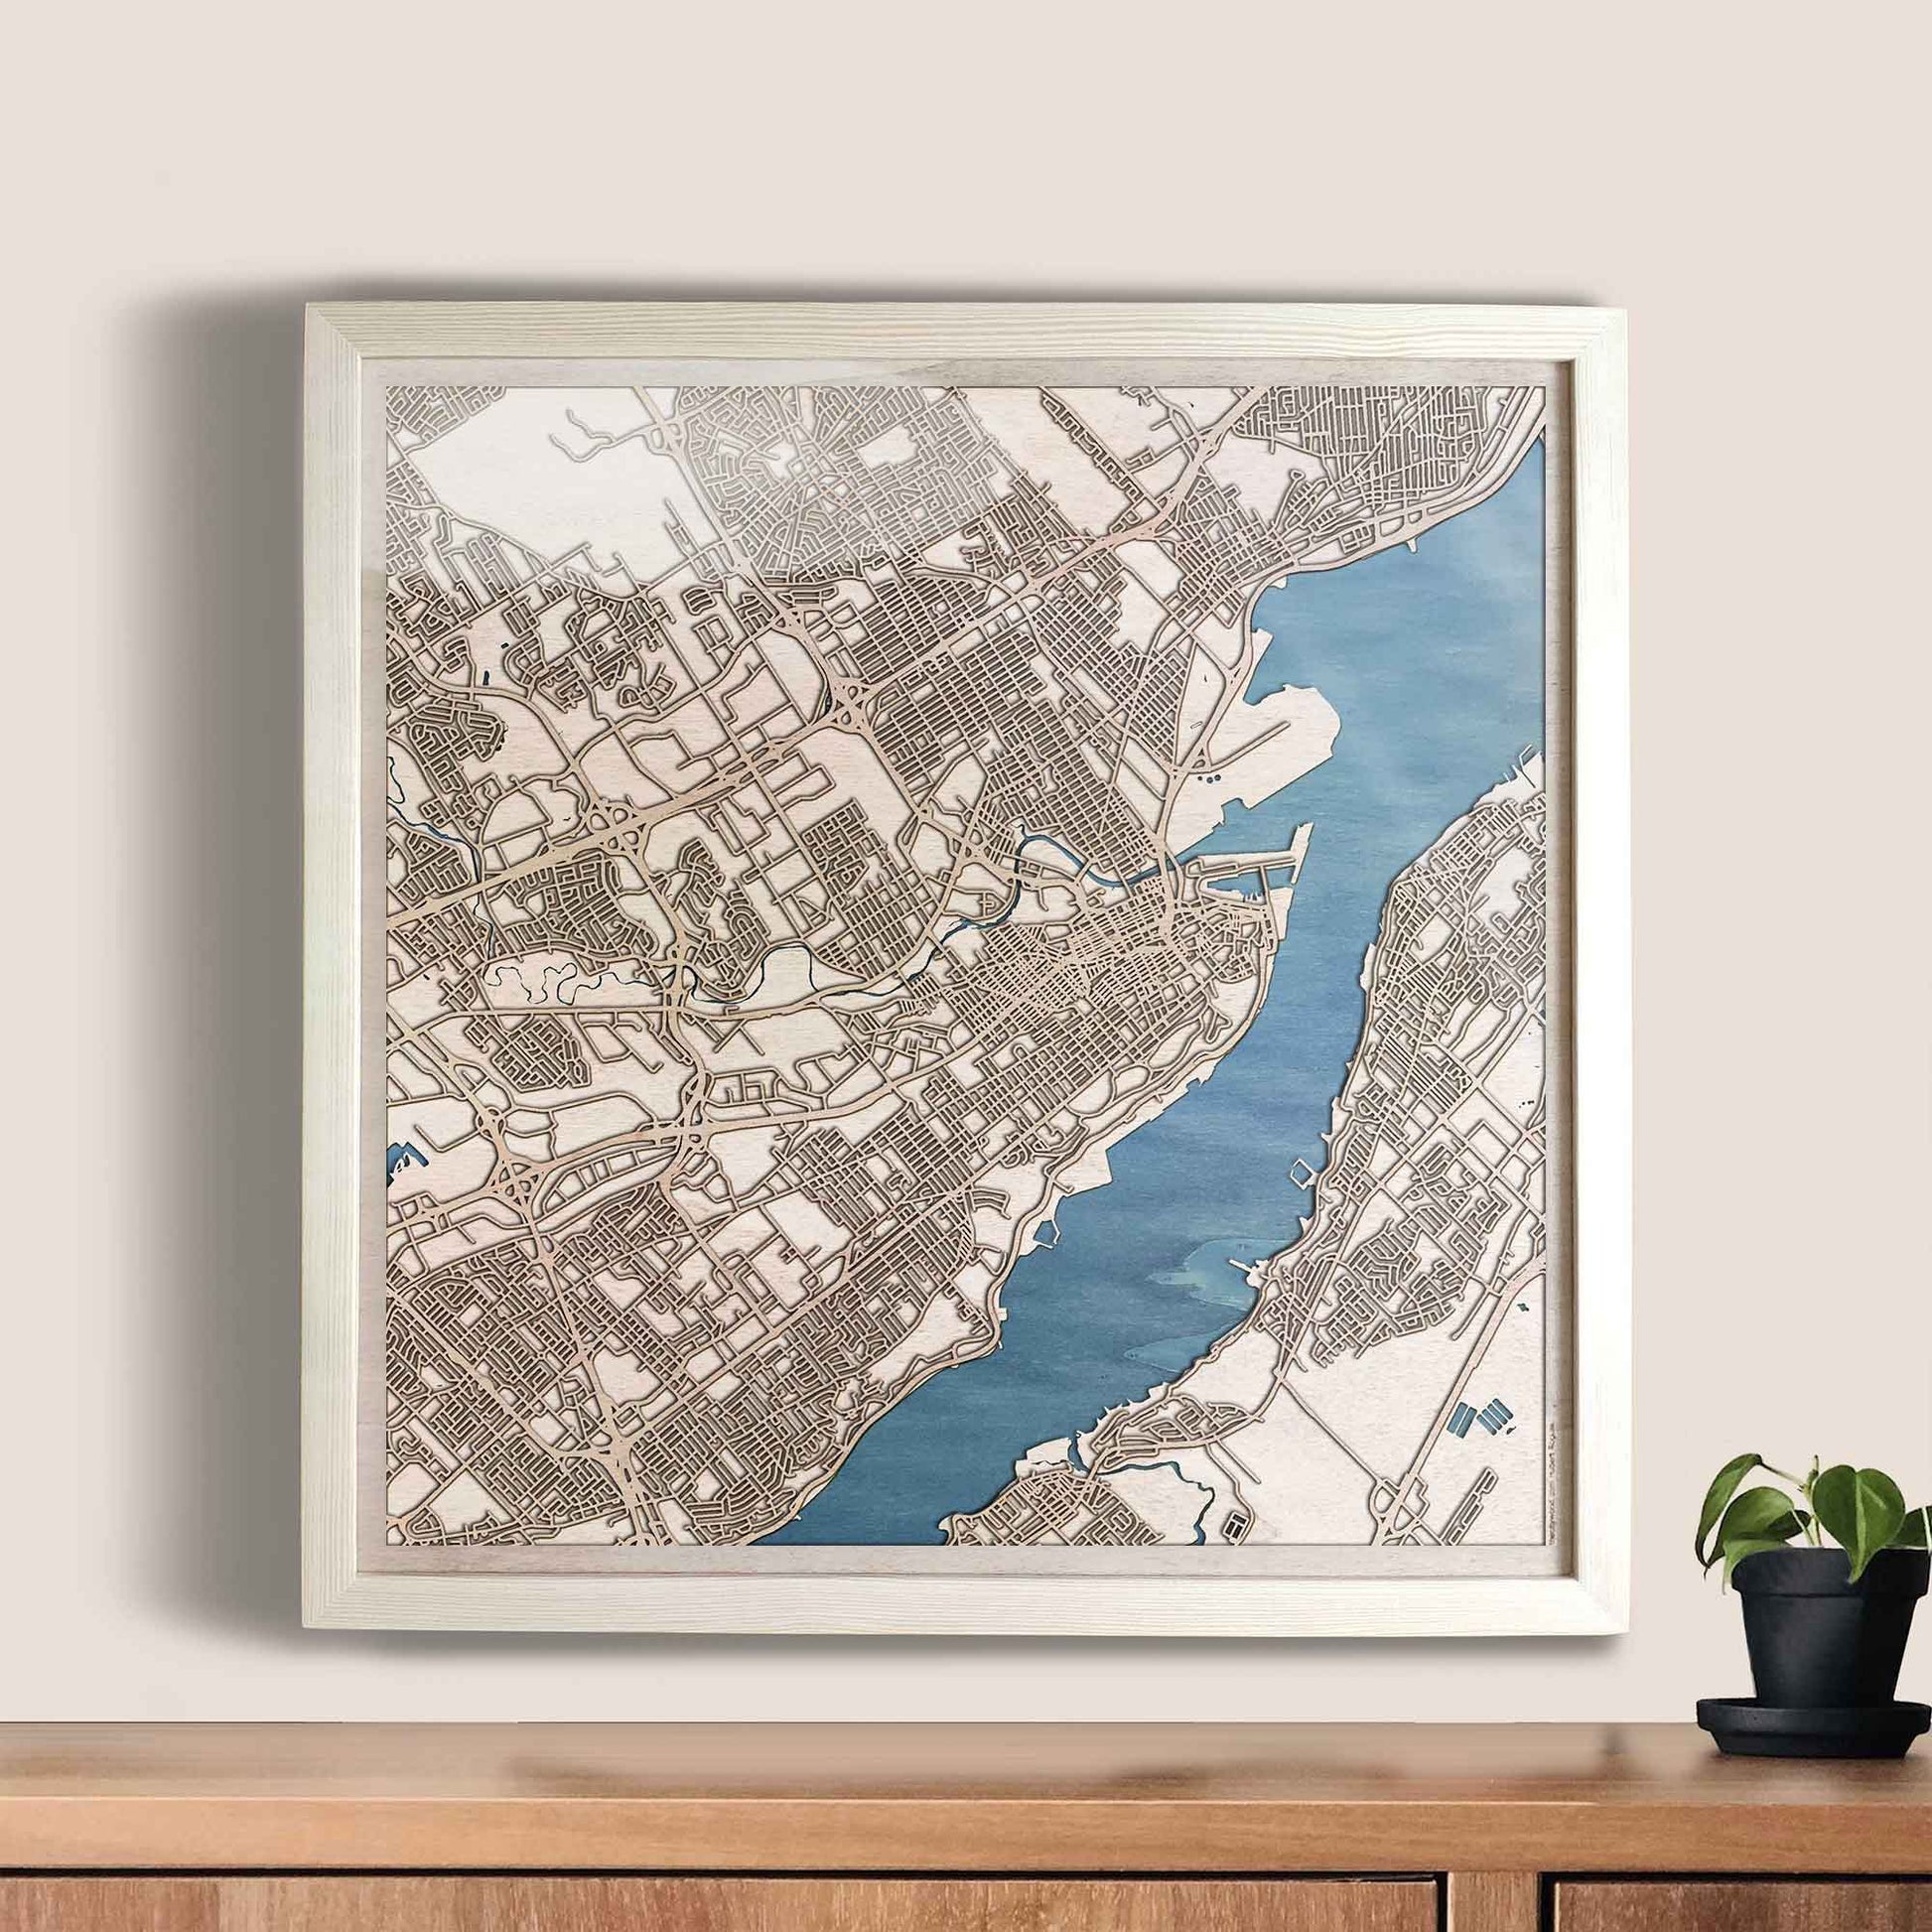 Quebec City Wooden Map by CityWood - Custom Wood Map Art - Unique Laser Cut Engraved - Anniversary Gift